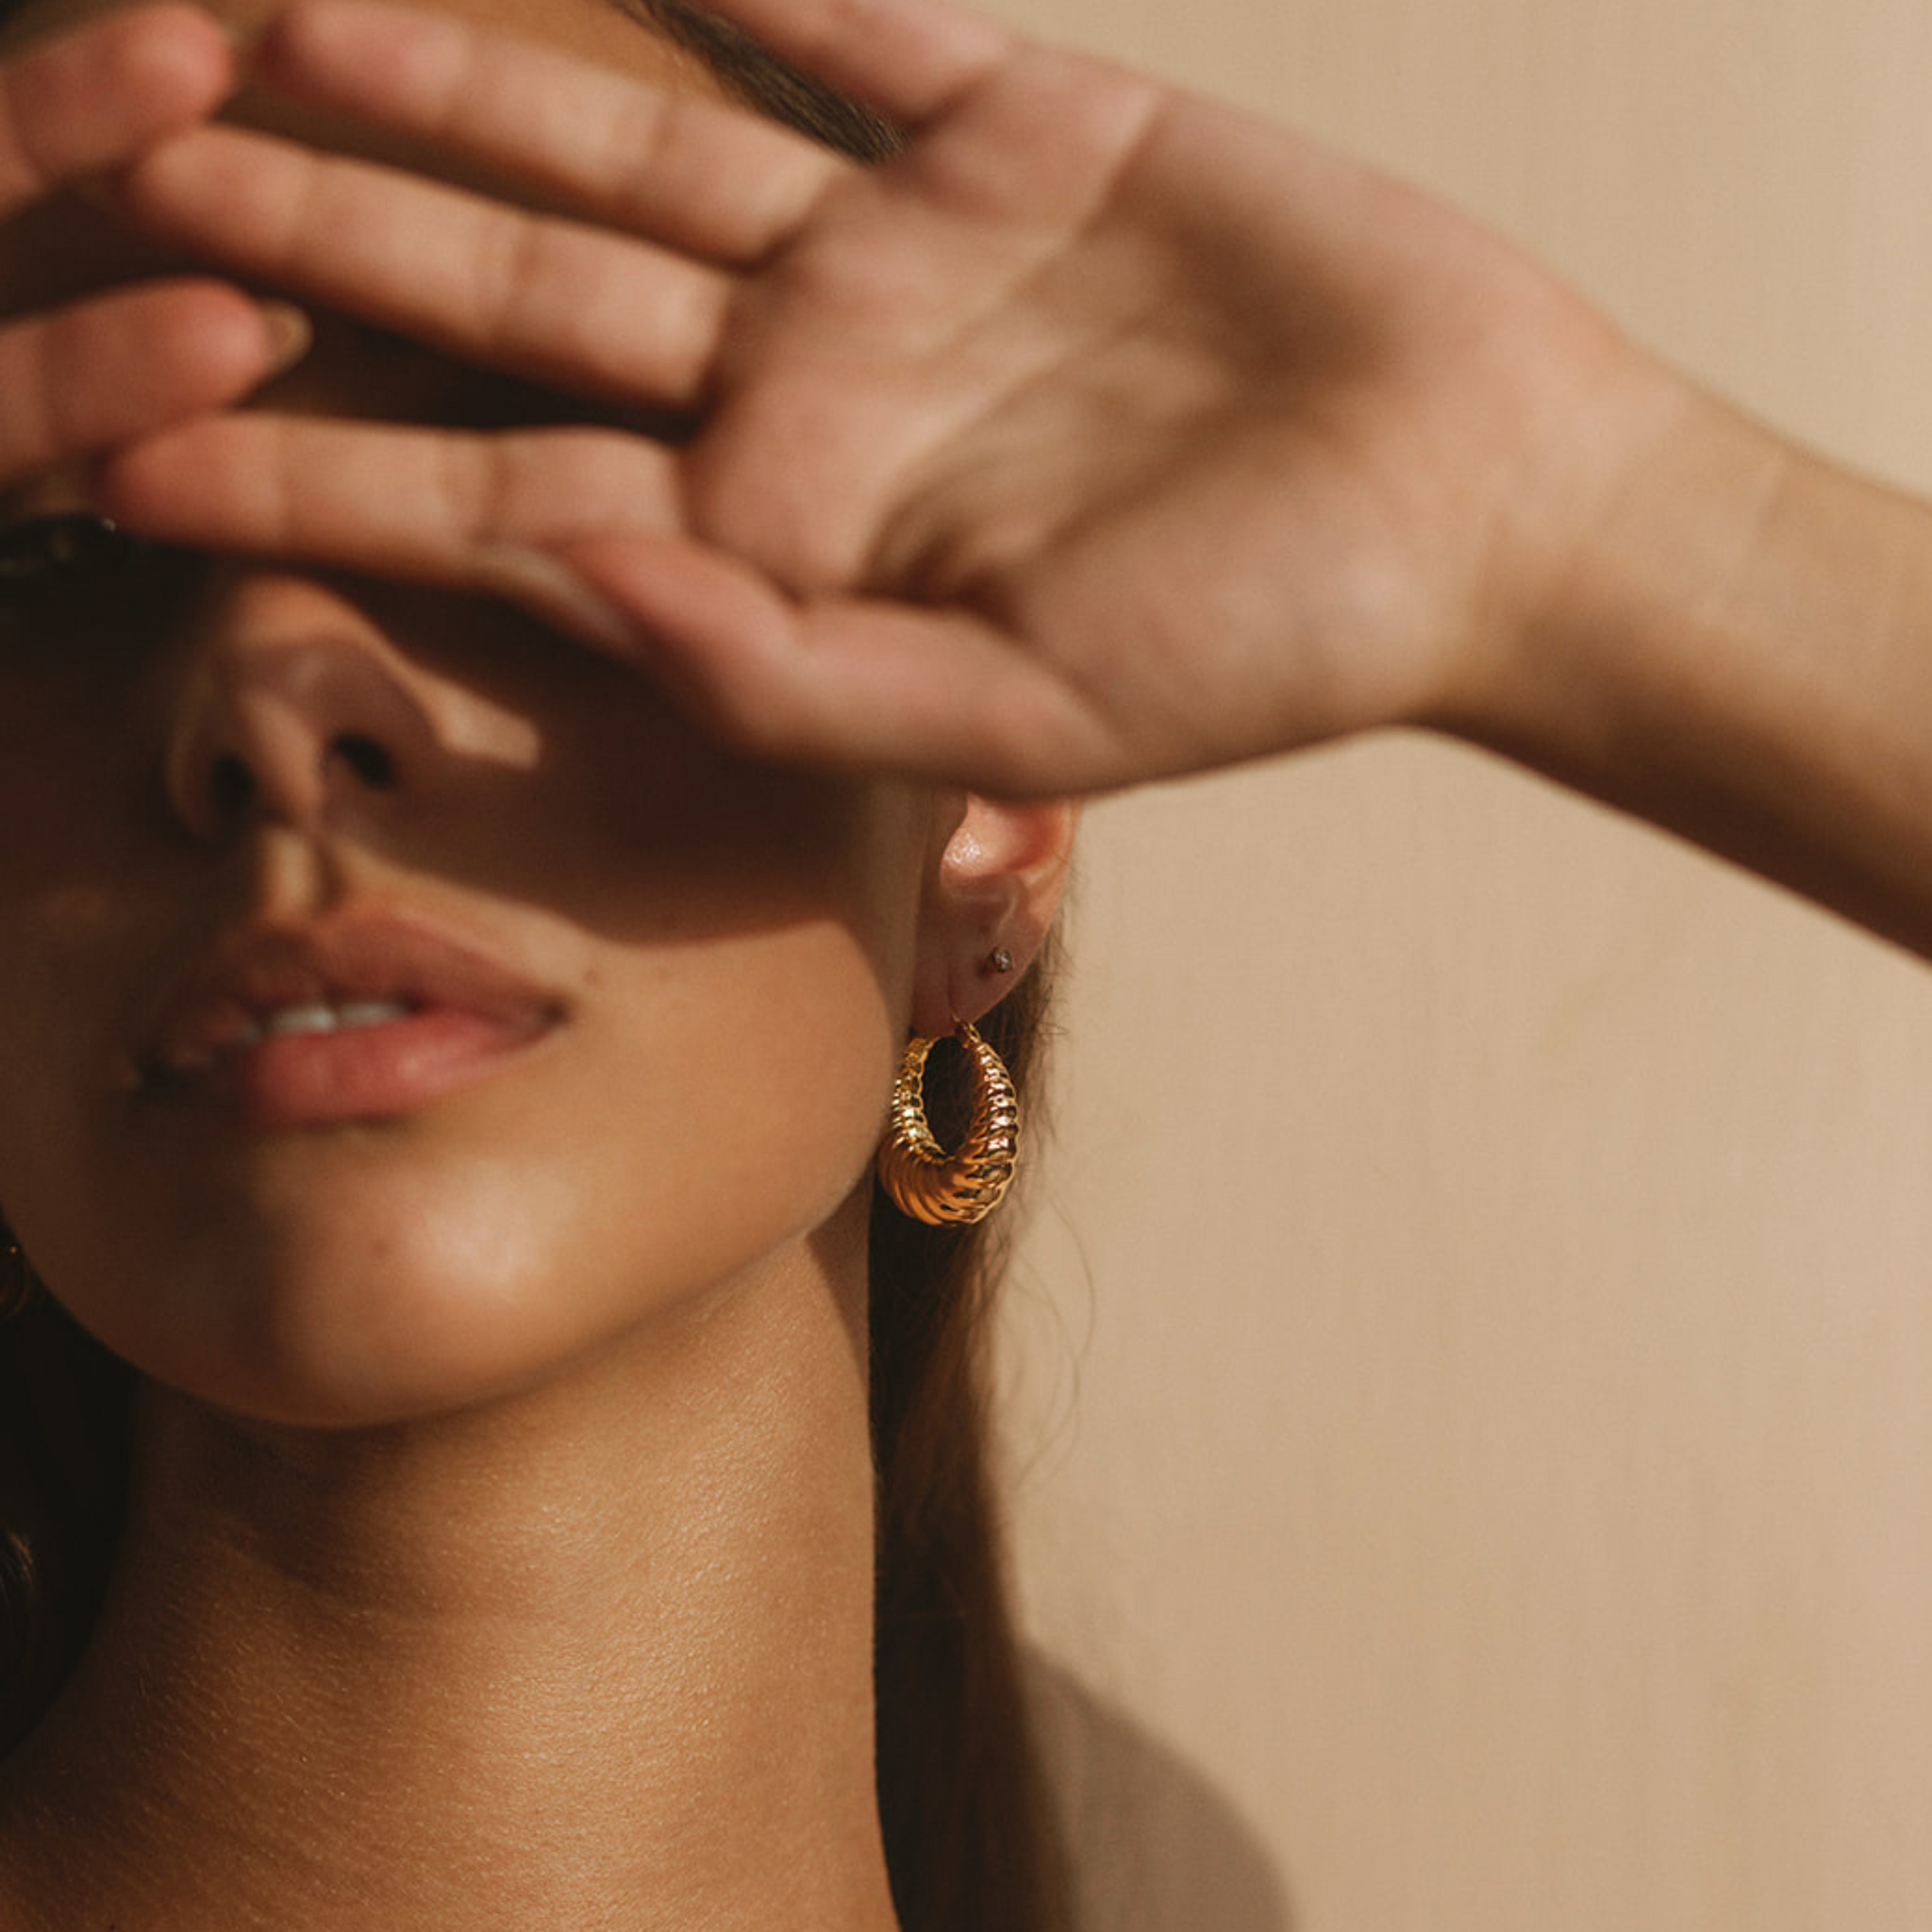 The model shades her eyes with her hand, drawing attention to the golden mid-sized hoop on her ear. 